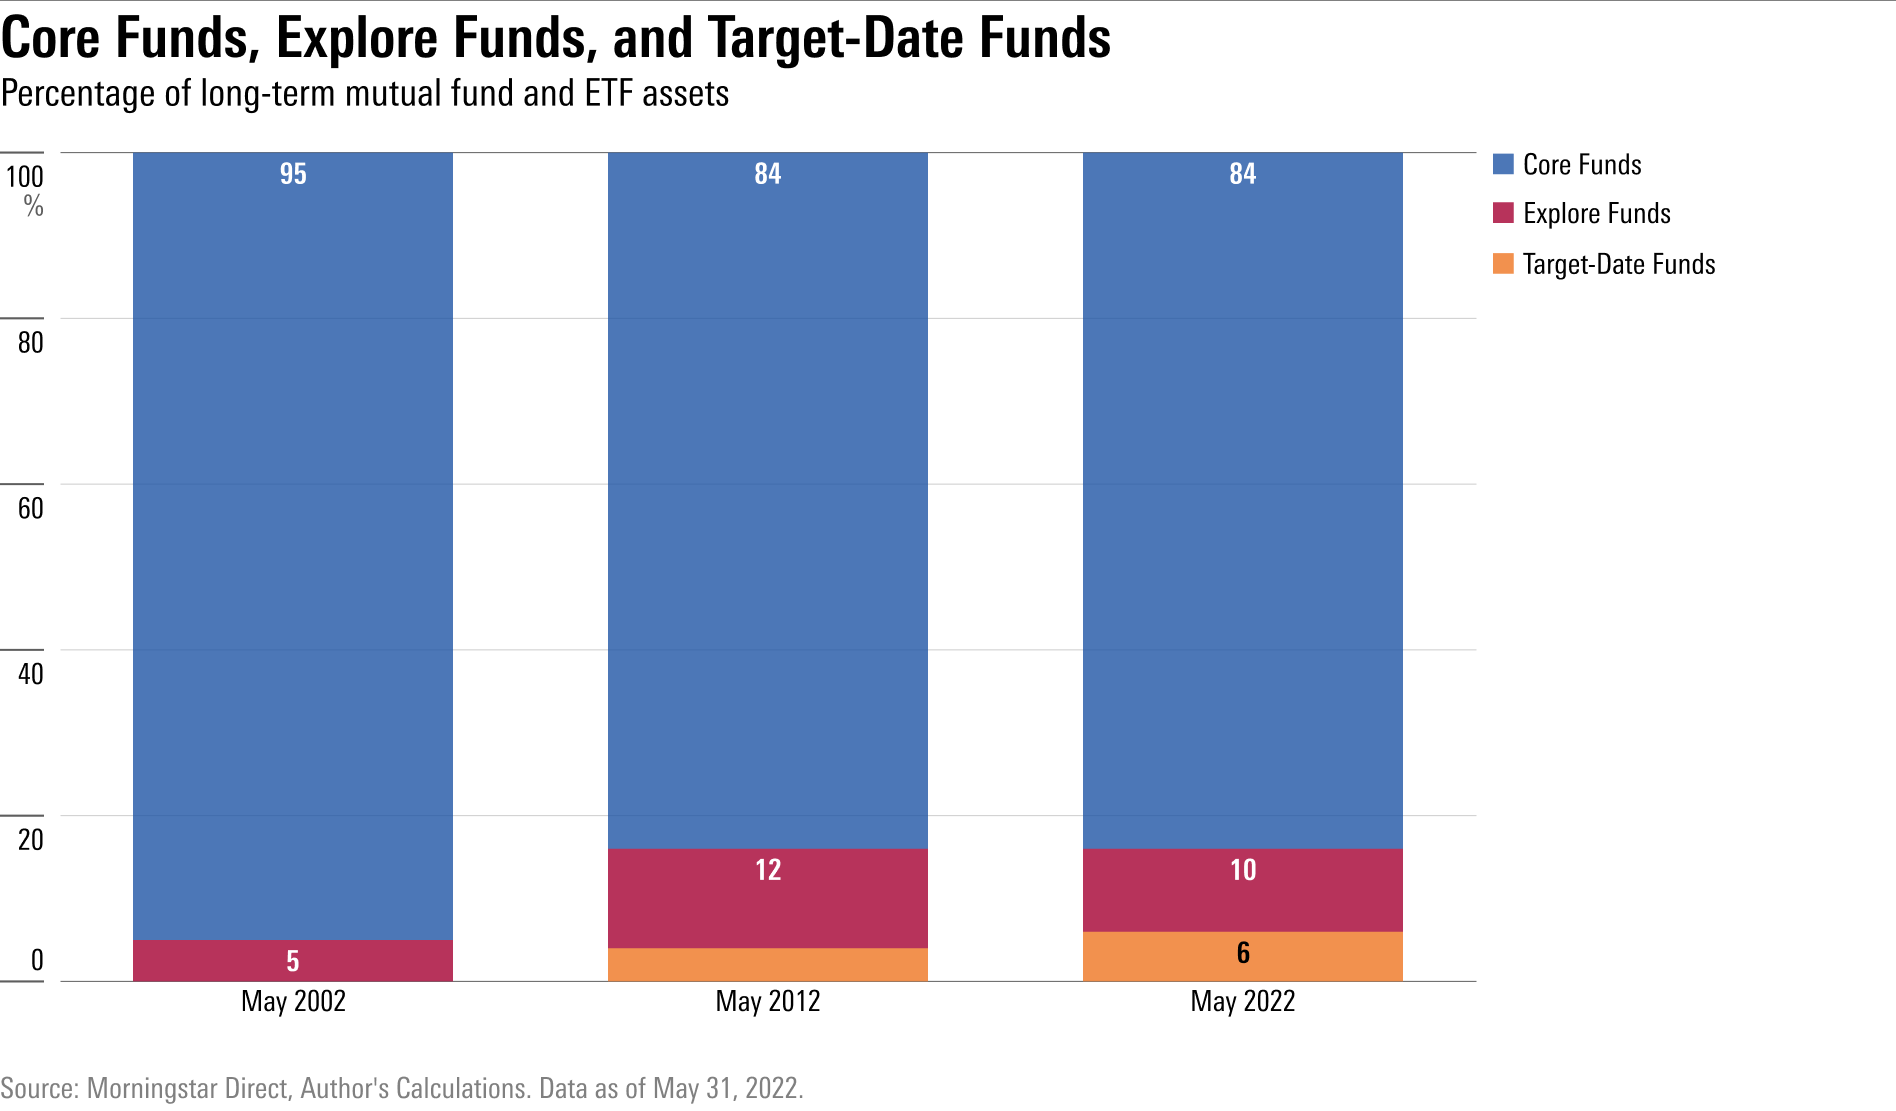 The market share for core funds, explore funds, and target-date funds in May 2002, May 2012, and May 2022.